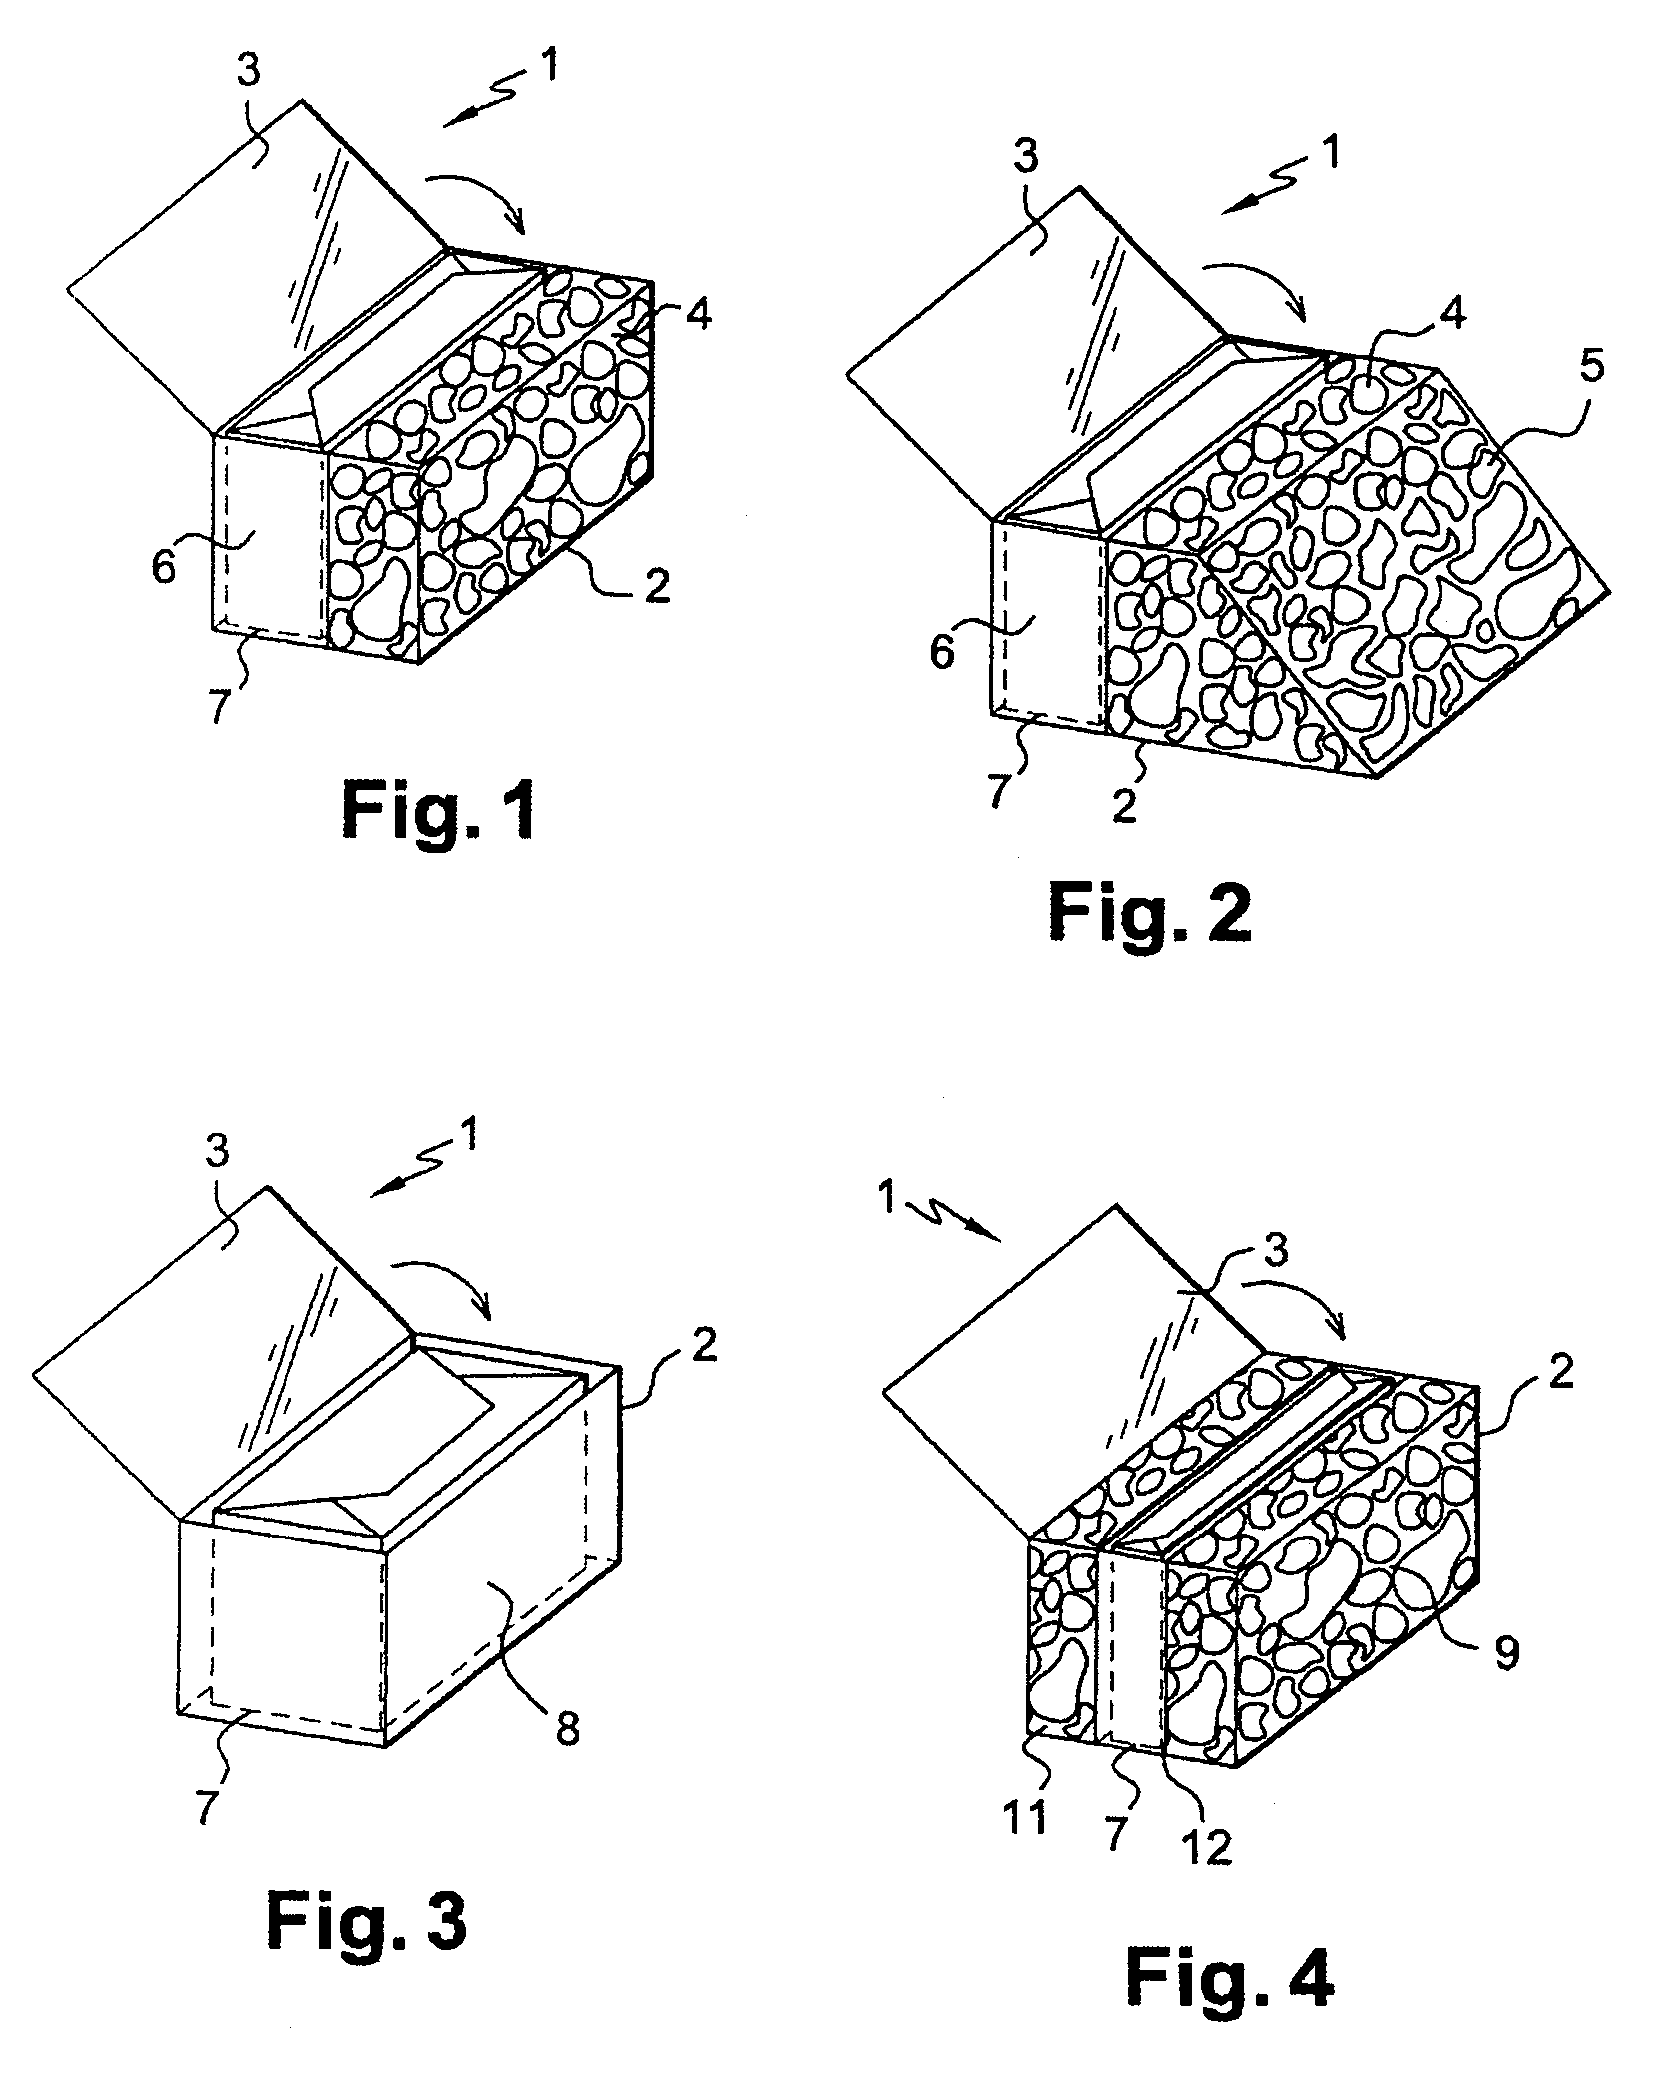 Civil engineering structure, individual construction element and method for reinforcing such a structure